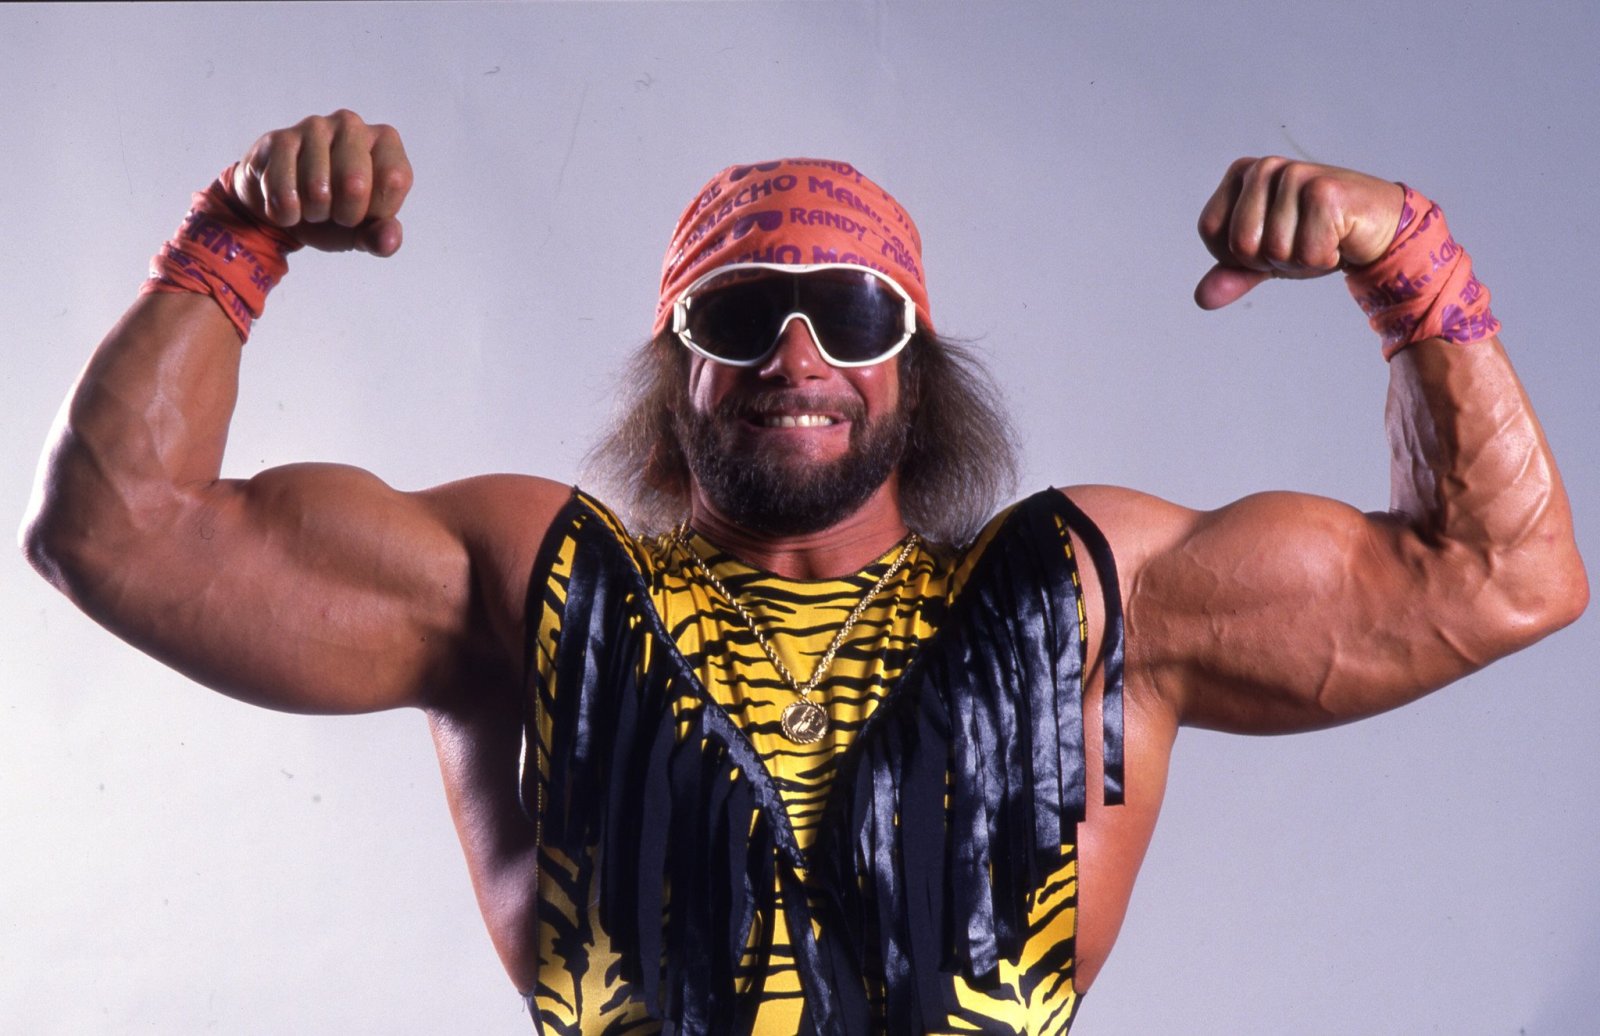 20-facts-about-randy-savage-1688888123.jpg